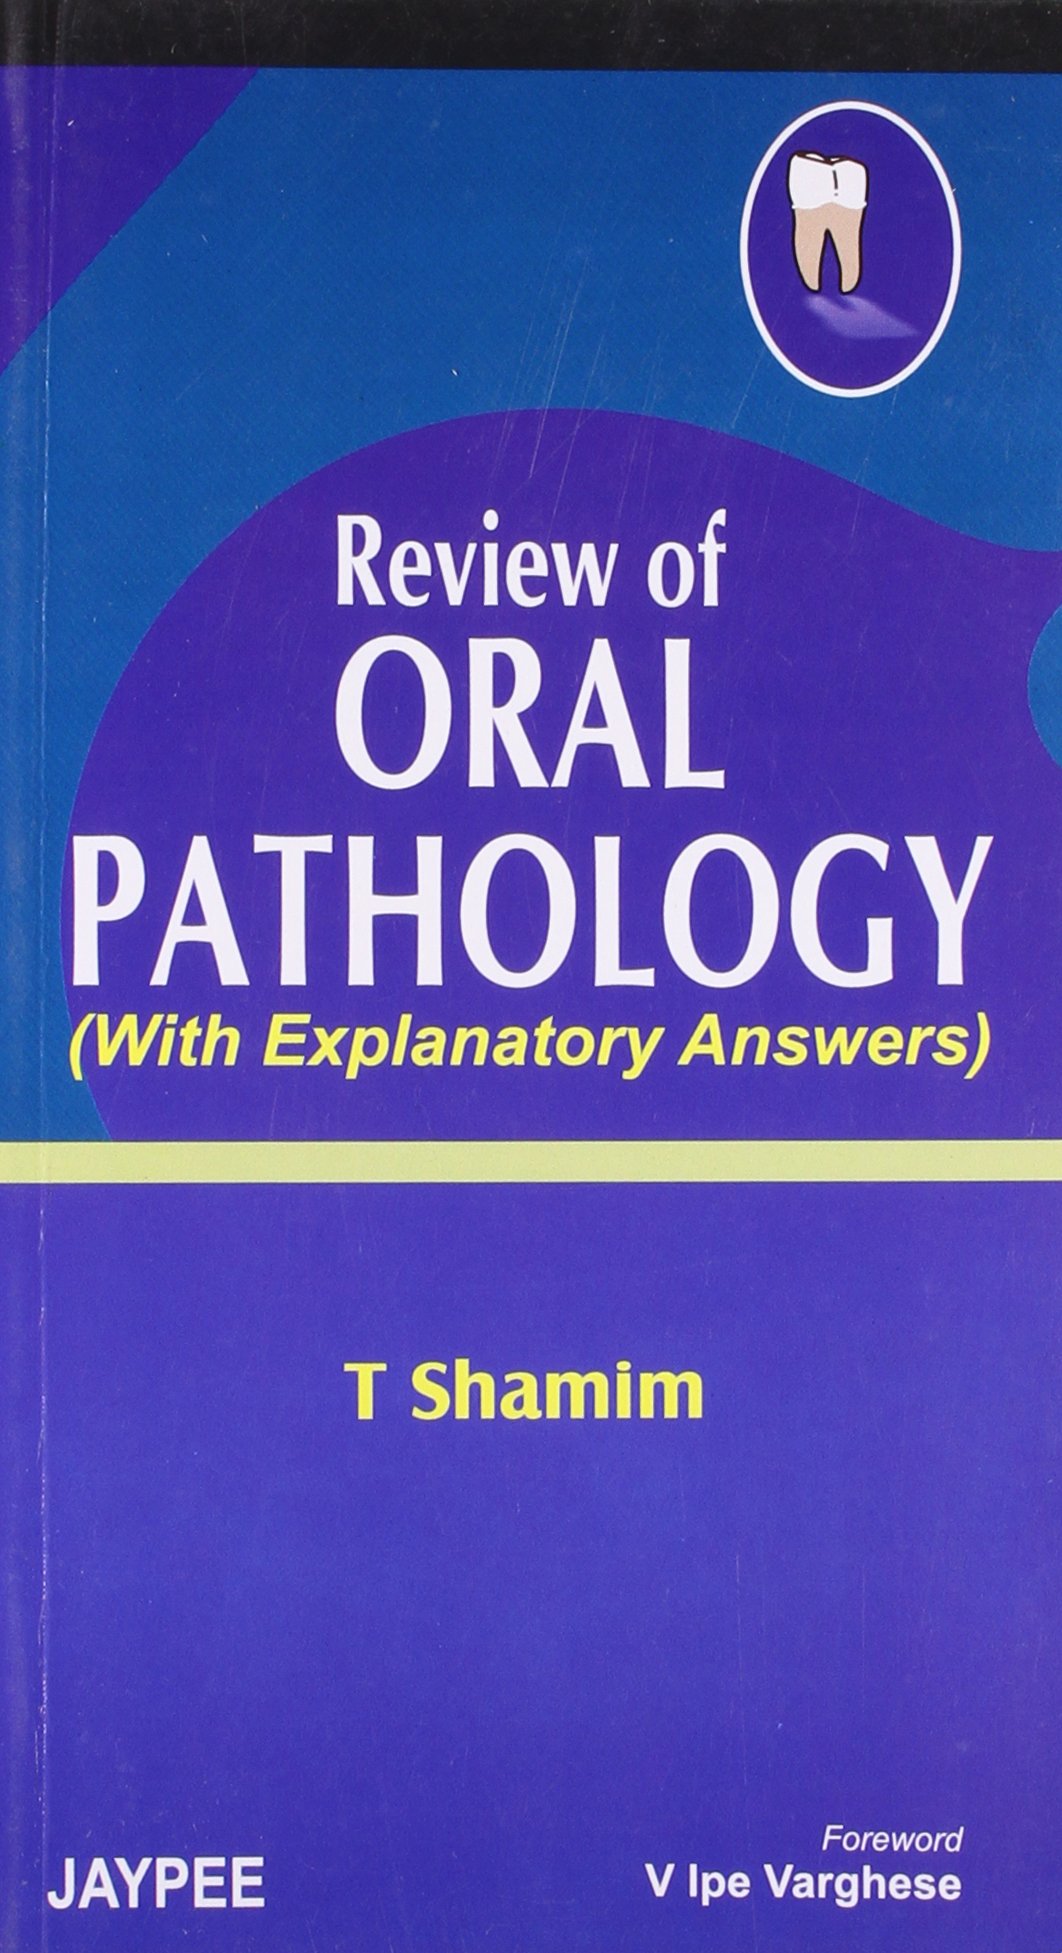 Review Of Oral Pathology (With Explanatory Answers)